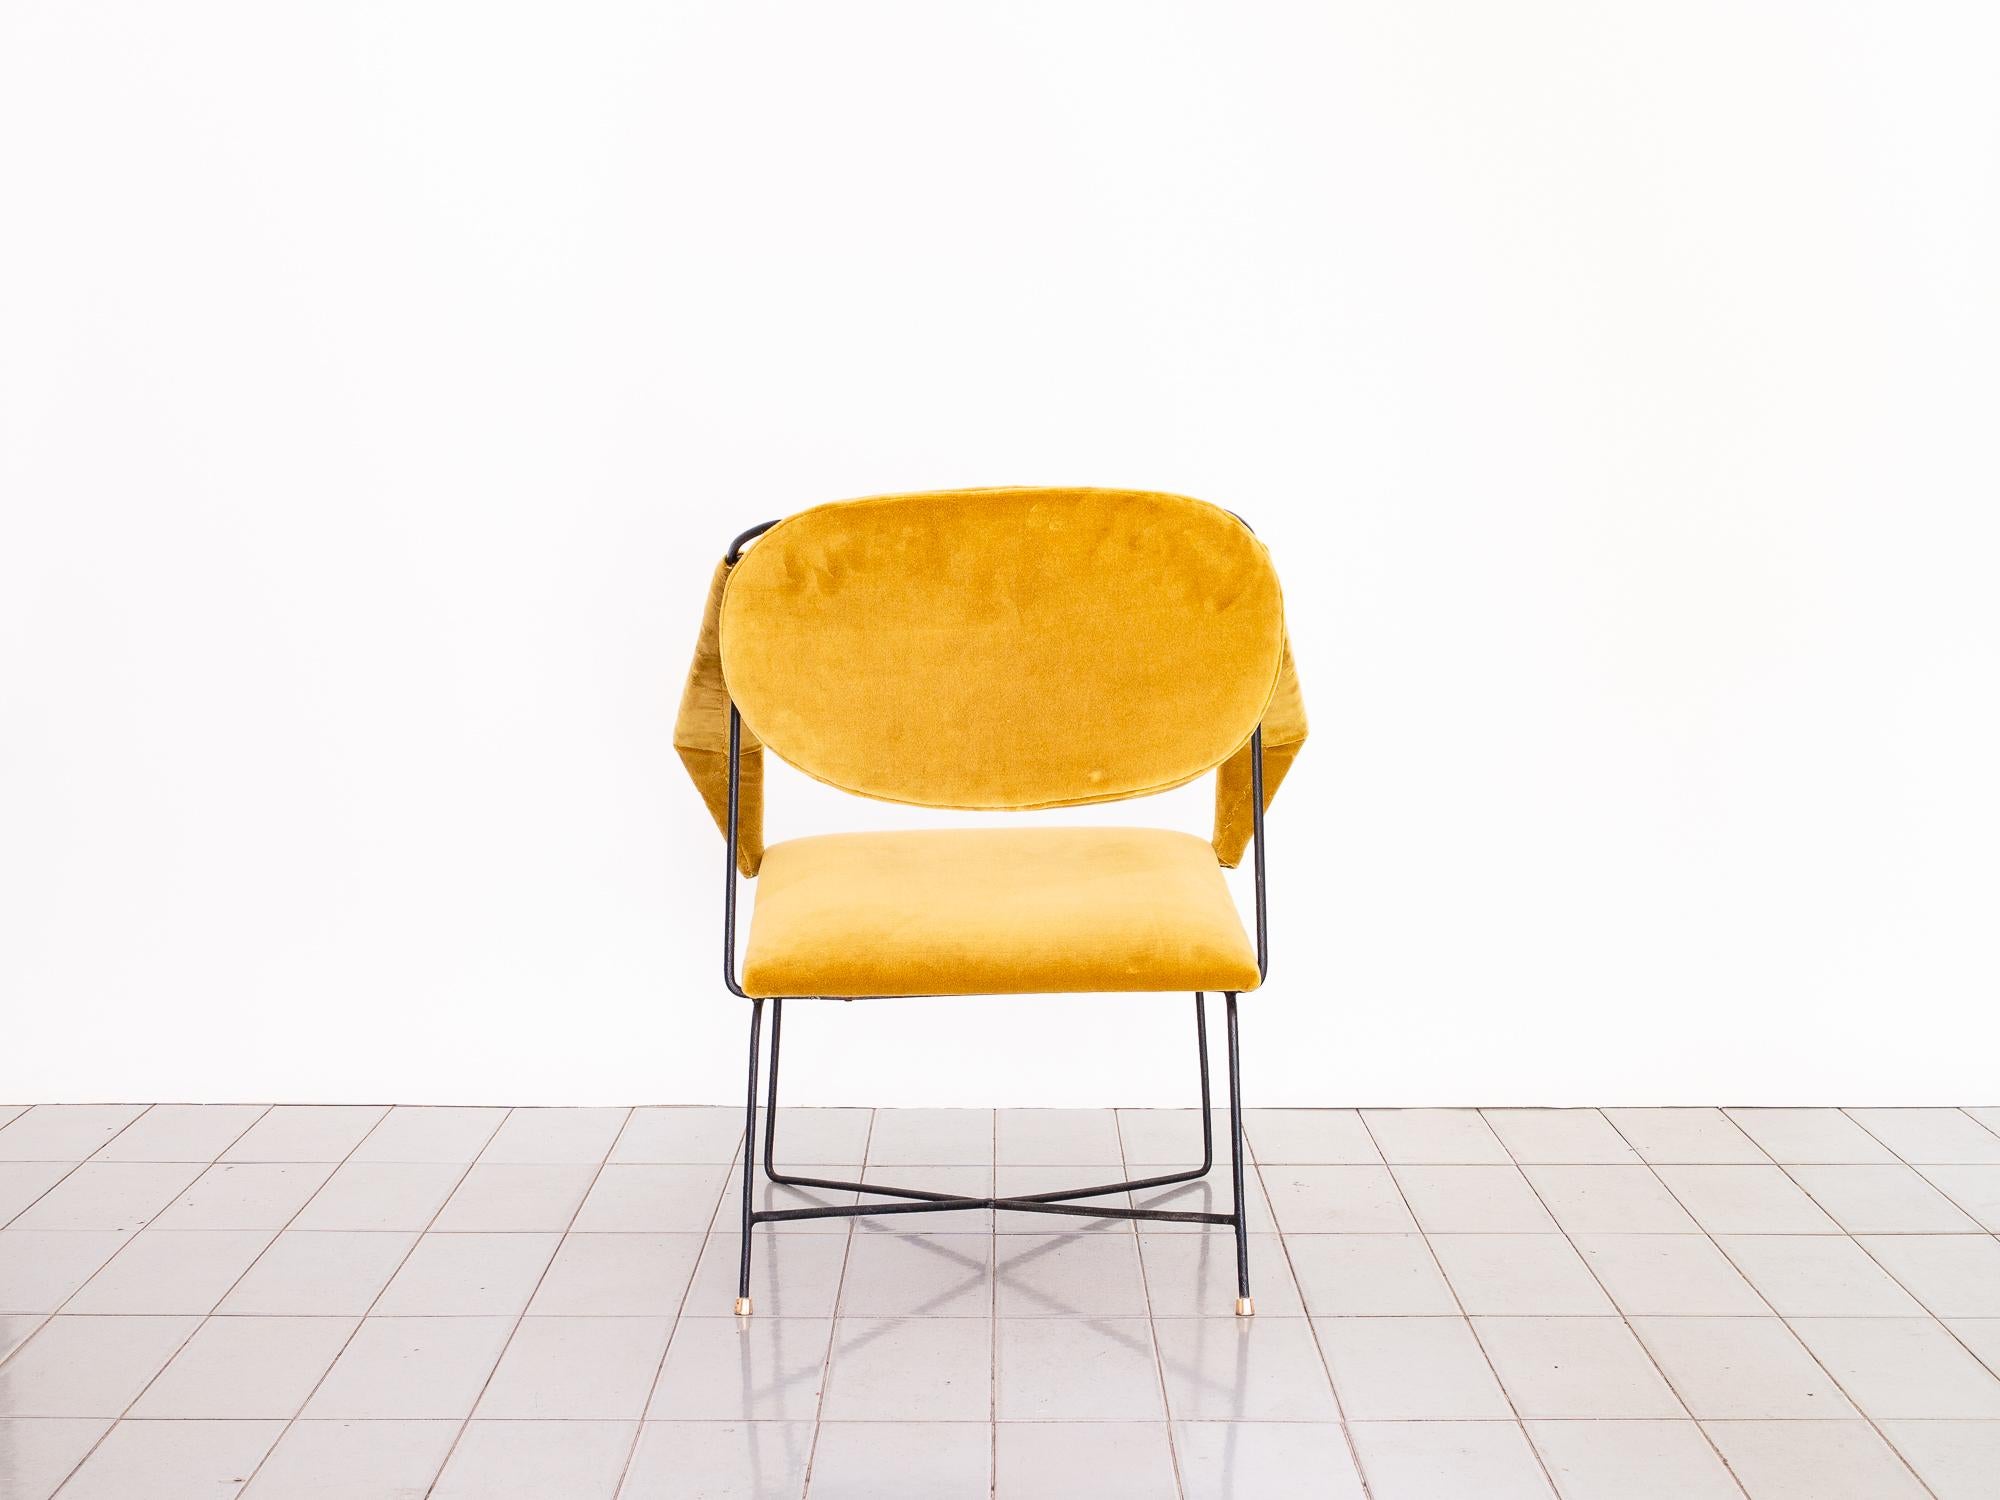 Brass 1950s Club Chair in Wrought Iron and Yellow Velvet, Brazilian Mid Century Modern